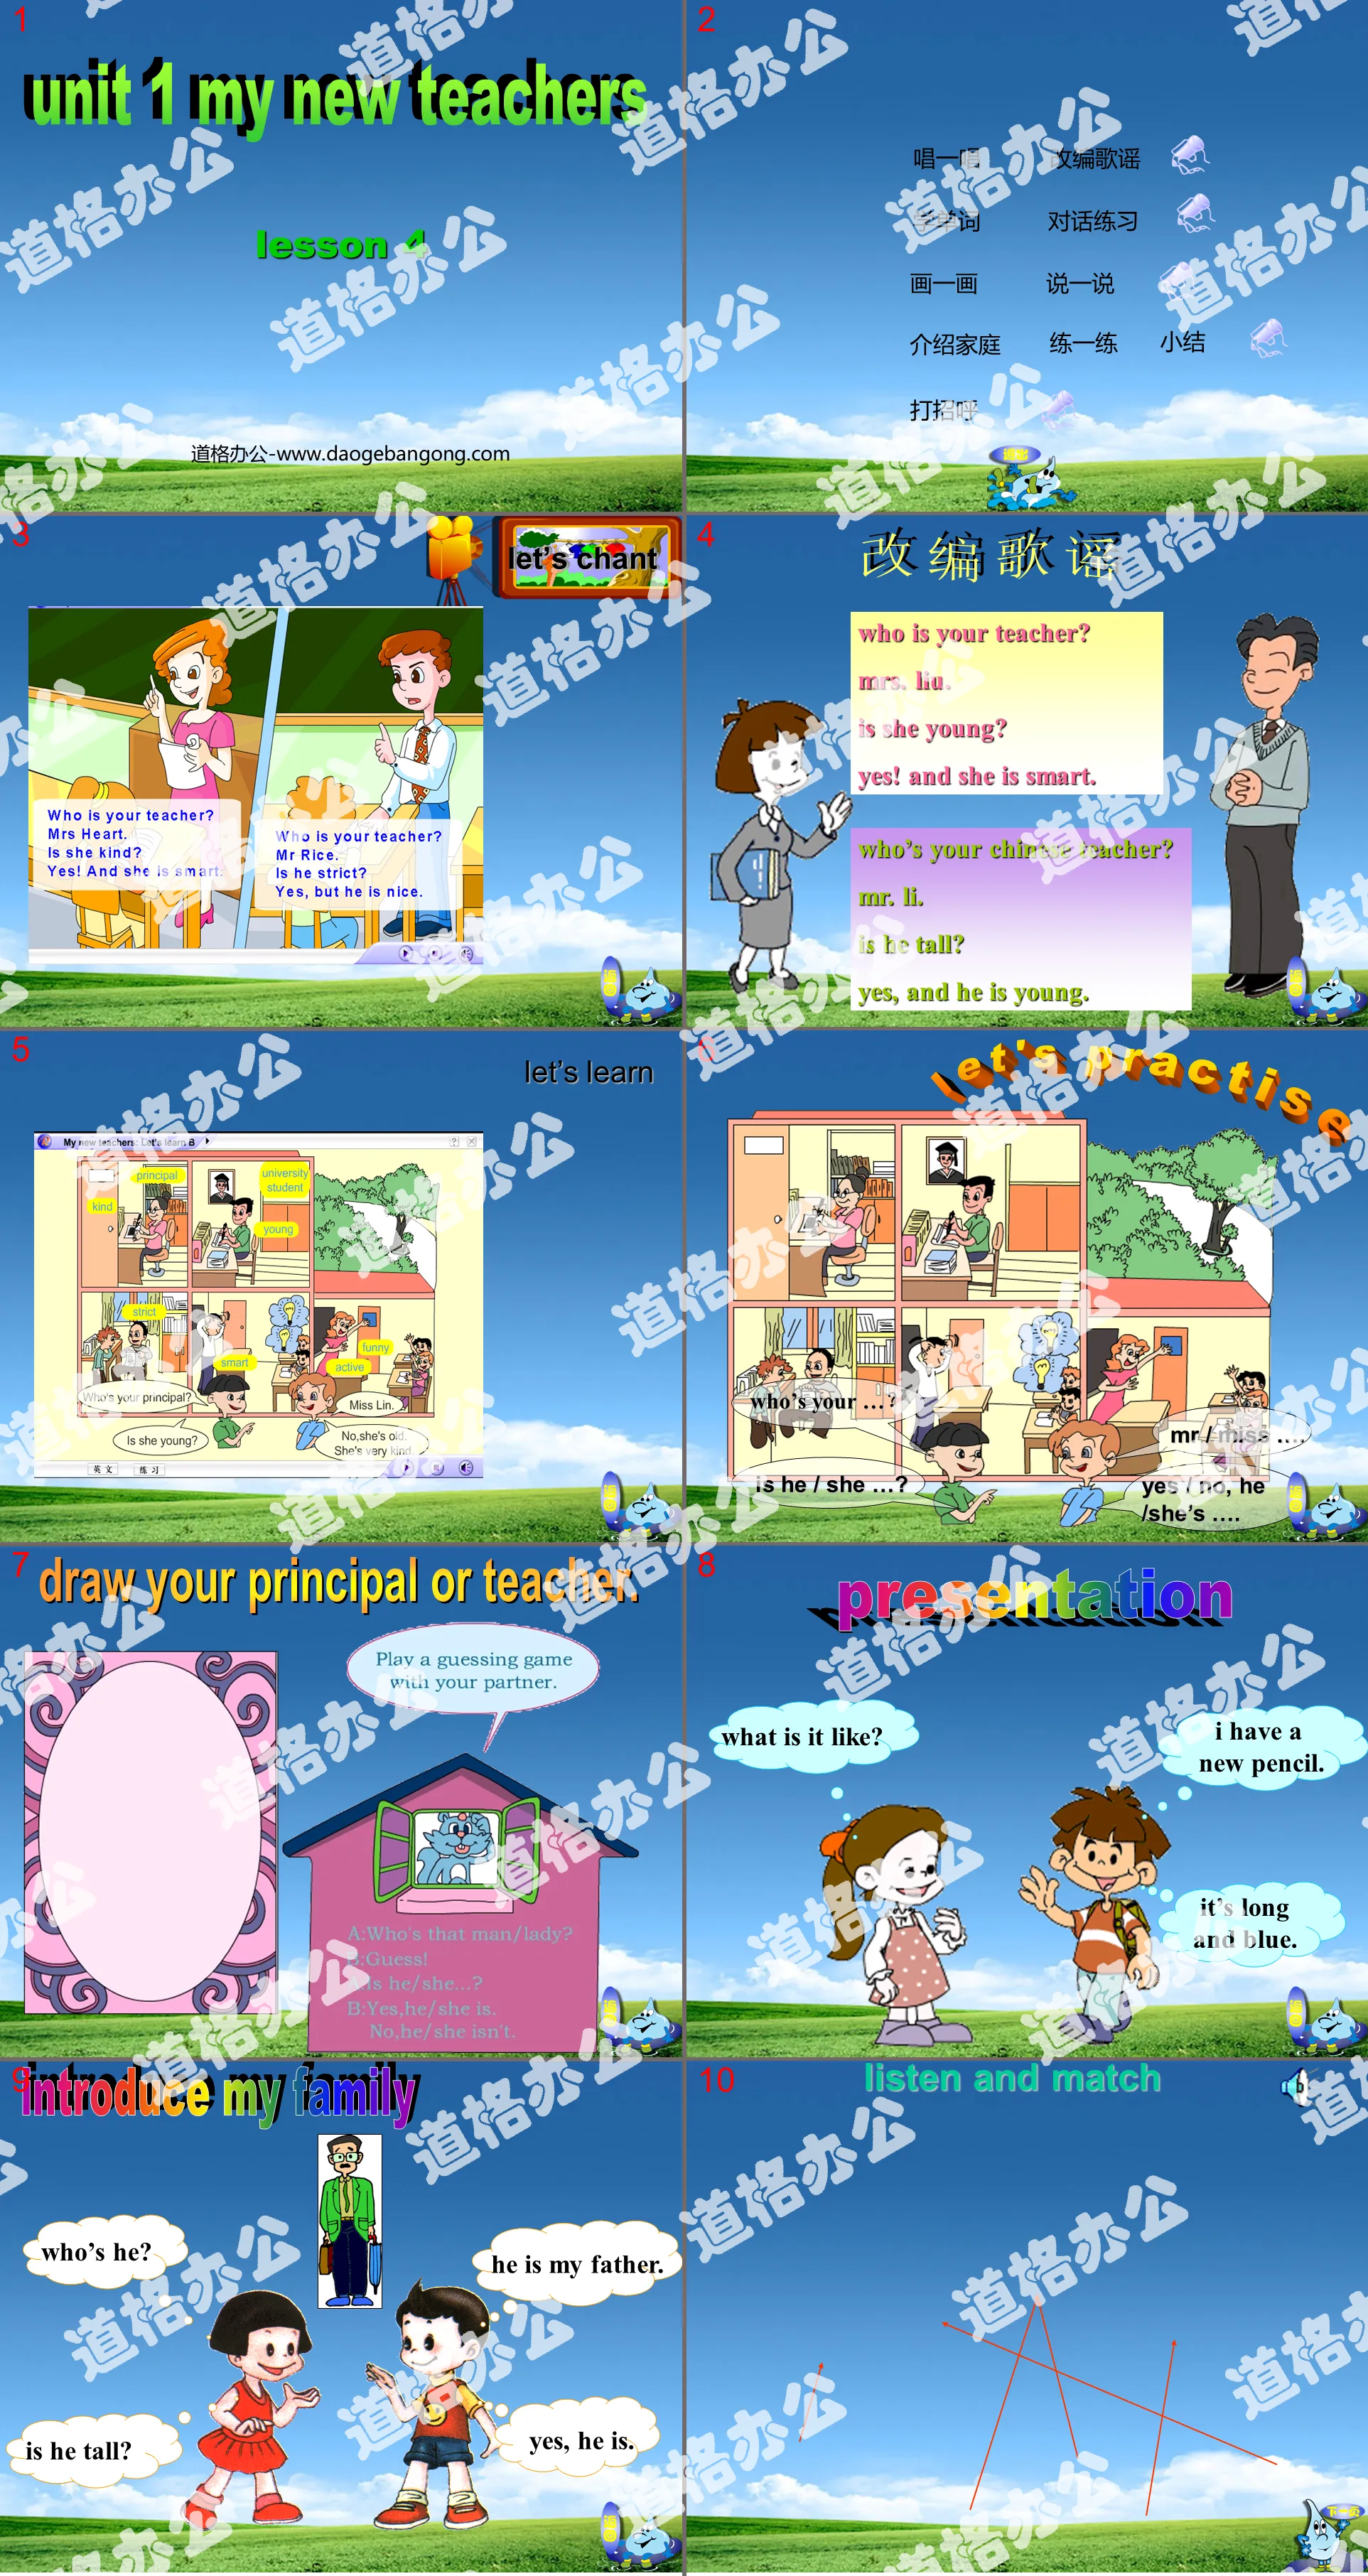 "Unit 1 My new teachers" PPT courseware for the fourth lesson